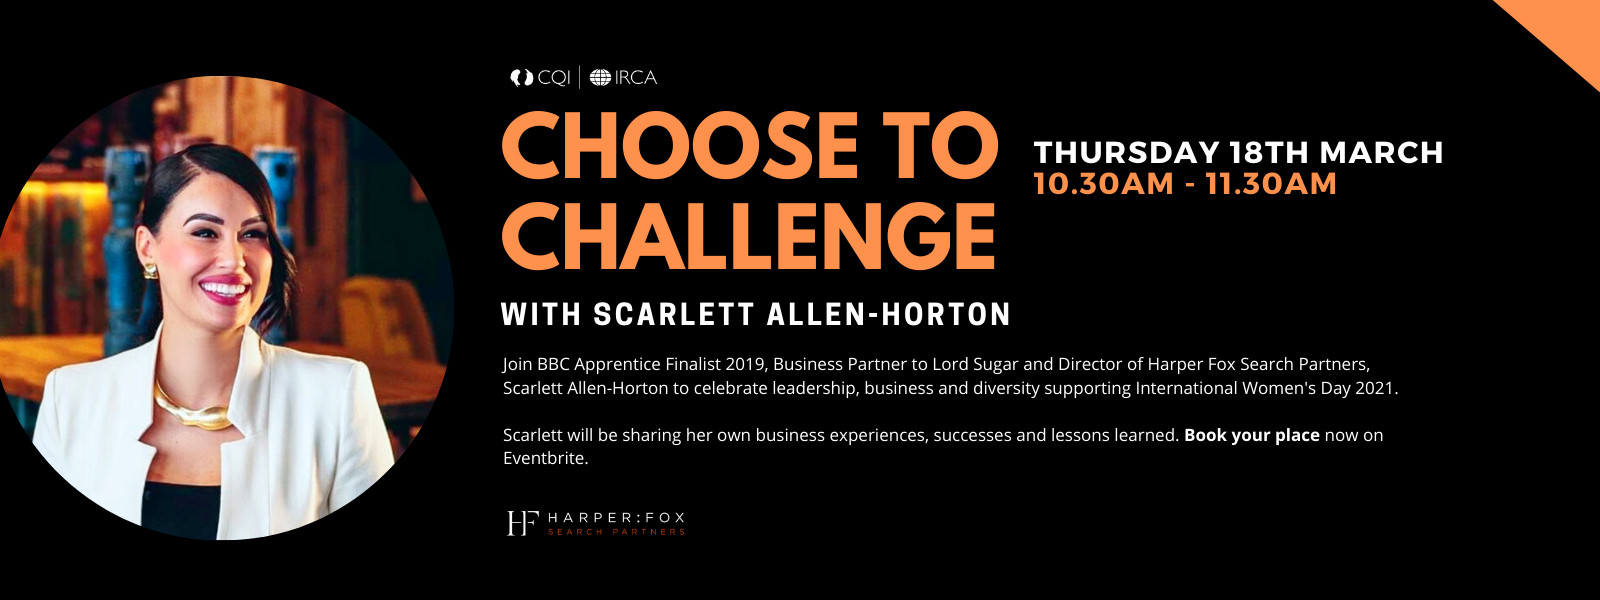 BBC Apprentice Finalist 2019 Scarlett Allen-Horton to be interviewed by Temple QMS for CQI event